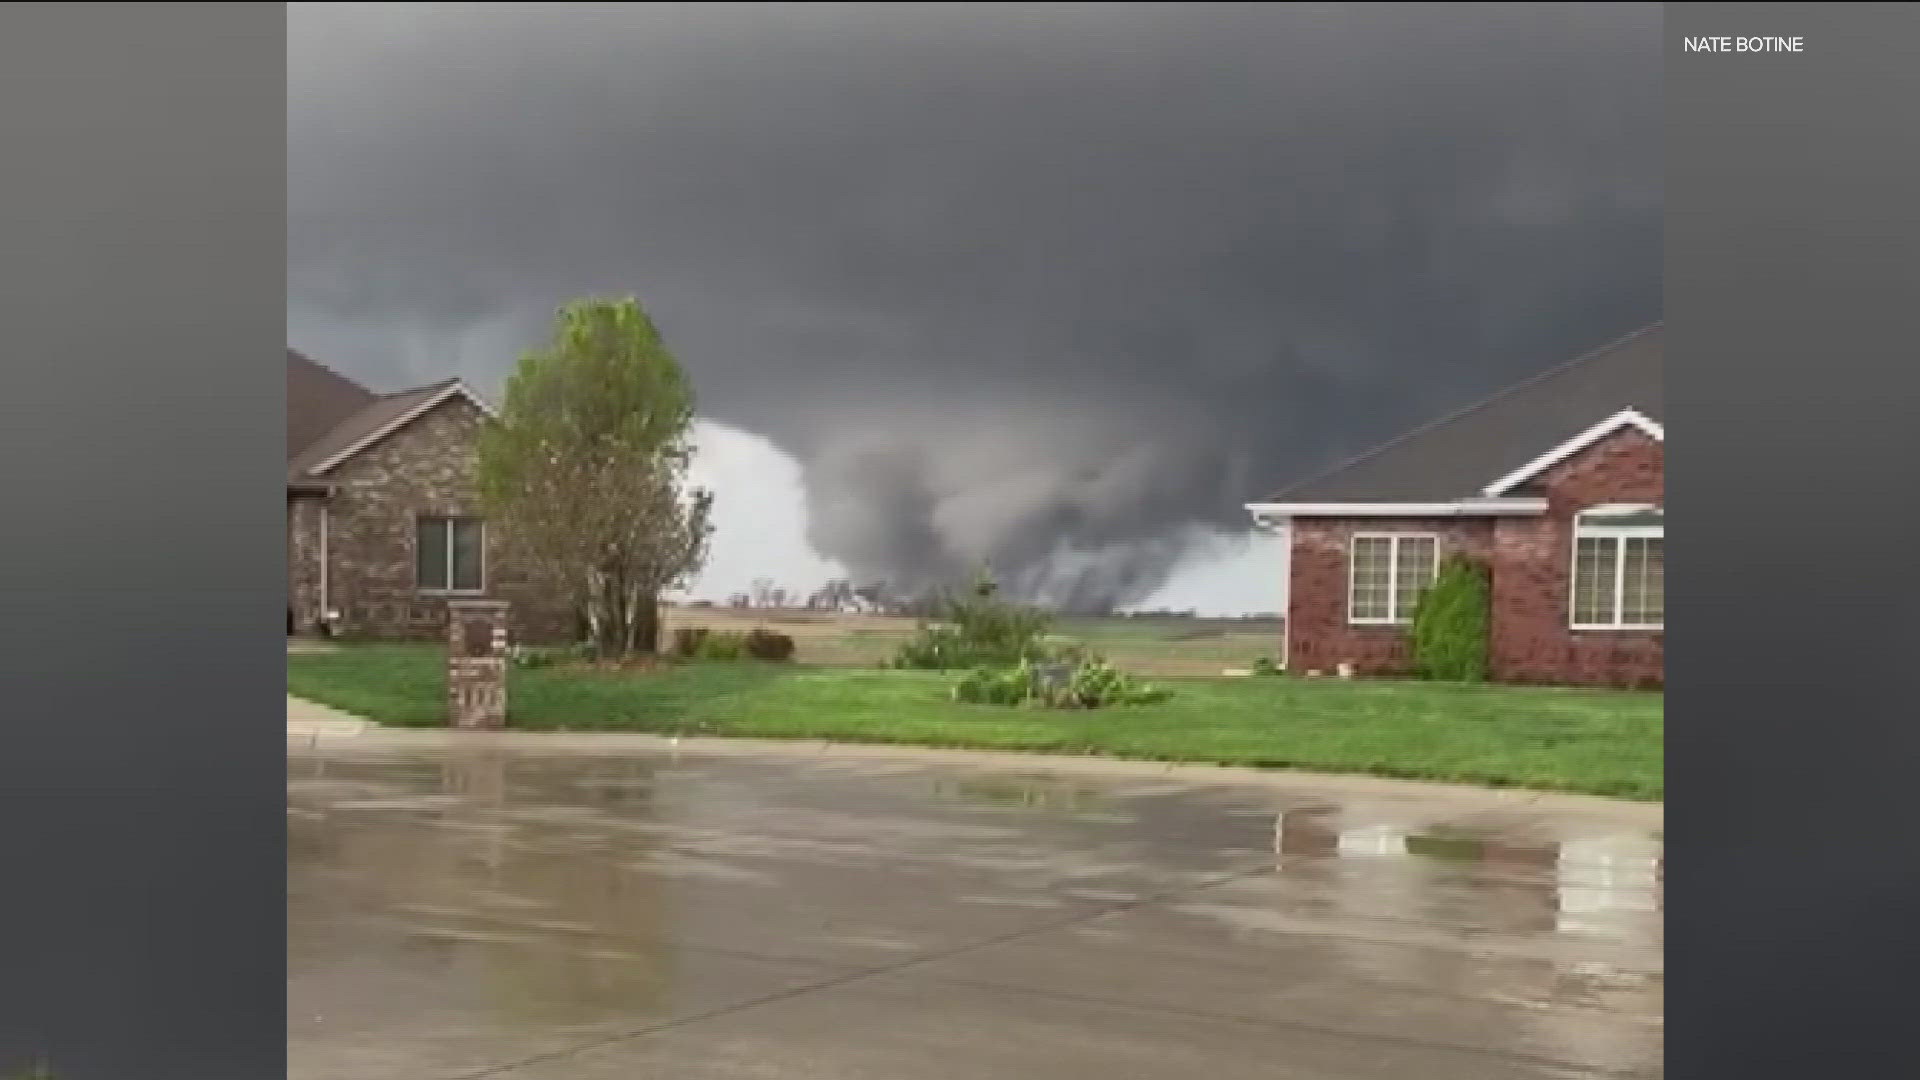 Multiple tornadoes were reported in Nebraska and Iowa on Friday.